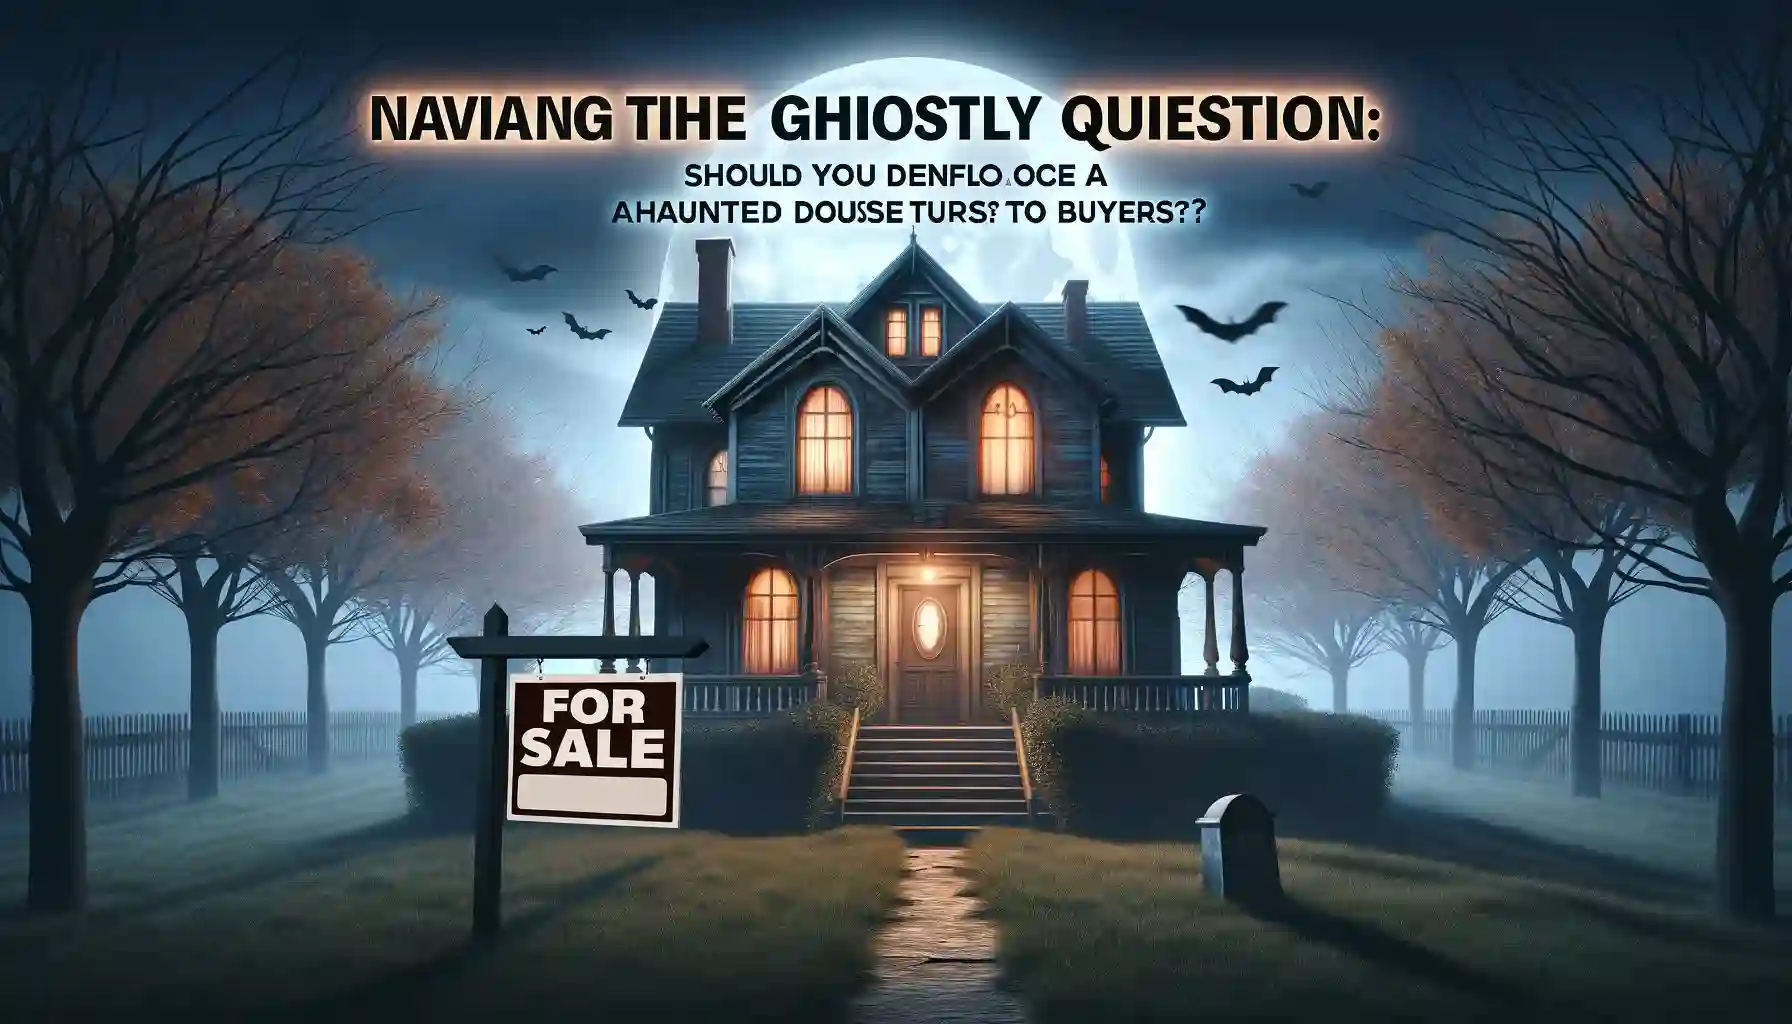 Navigating the Ghostly Question: Should You Disclose a Haunted House to Buyers?